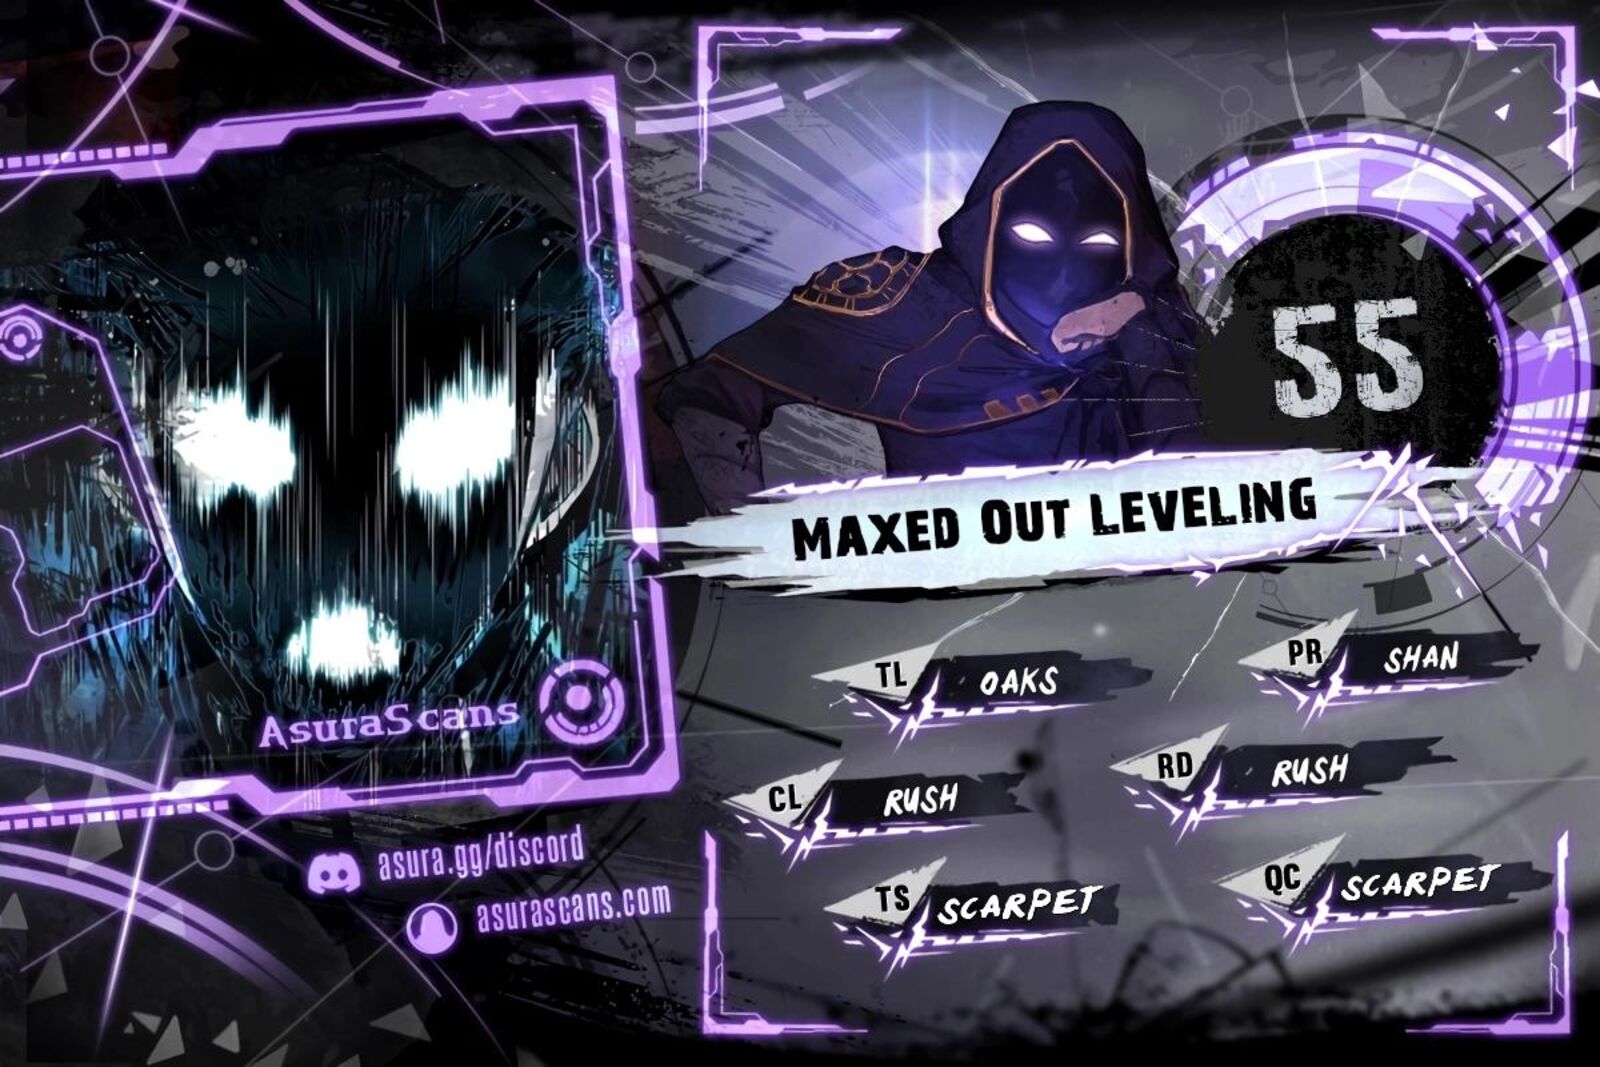 Maxed Out Leveling 55 1